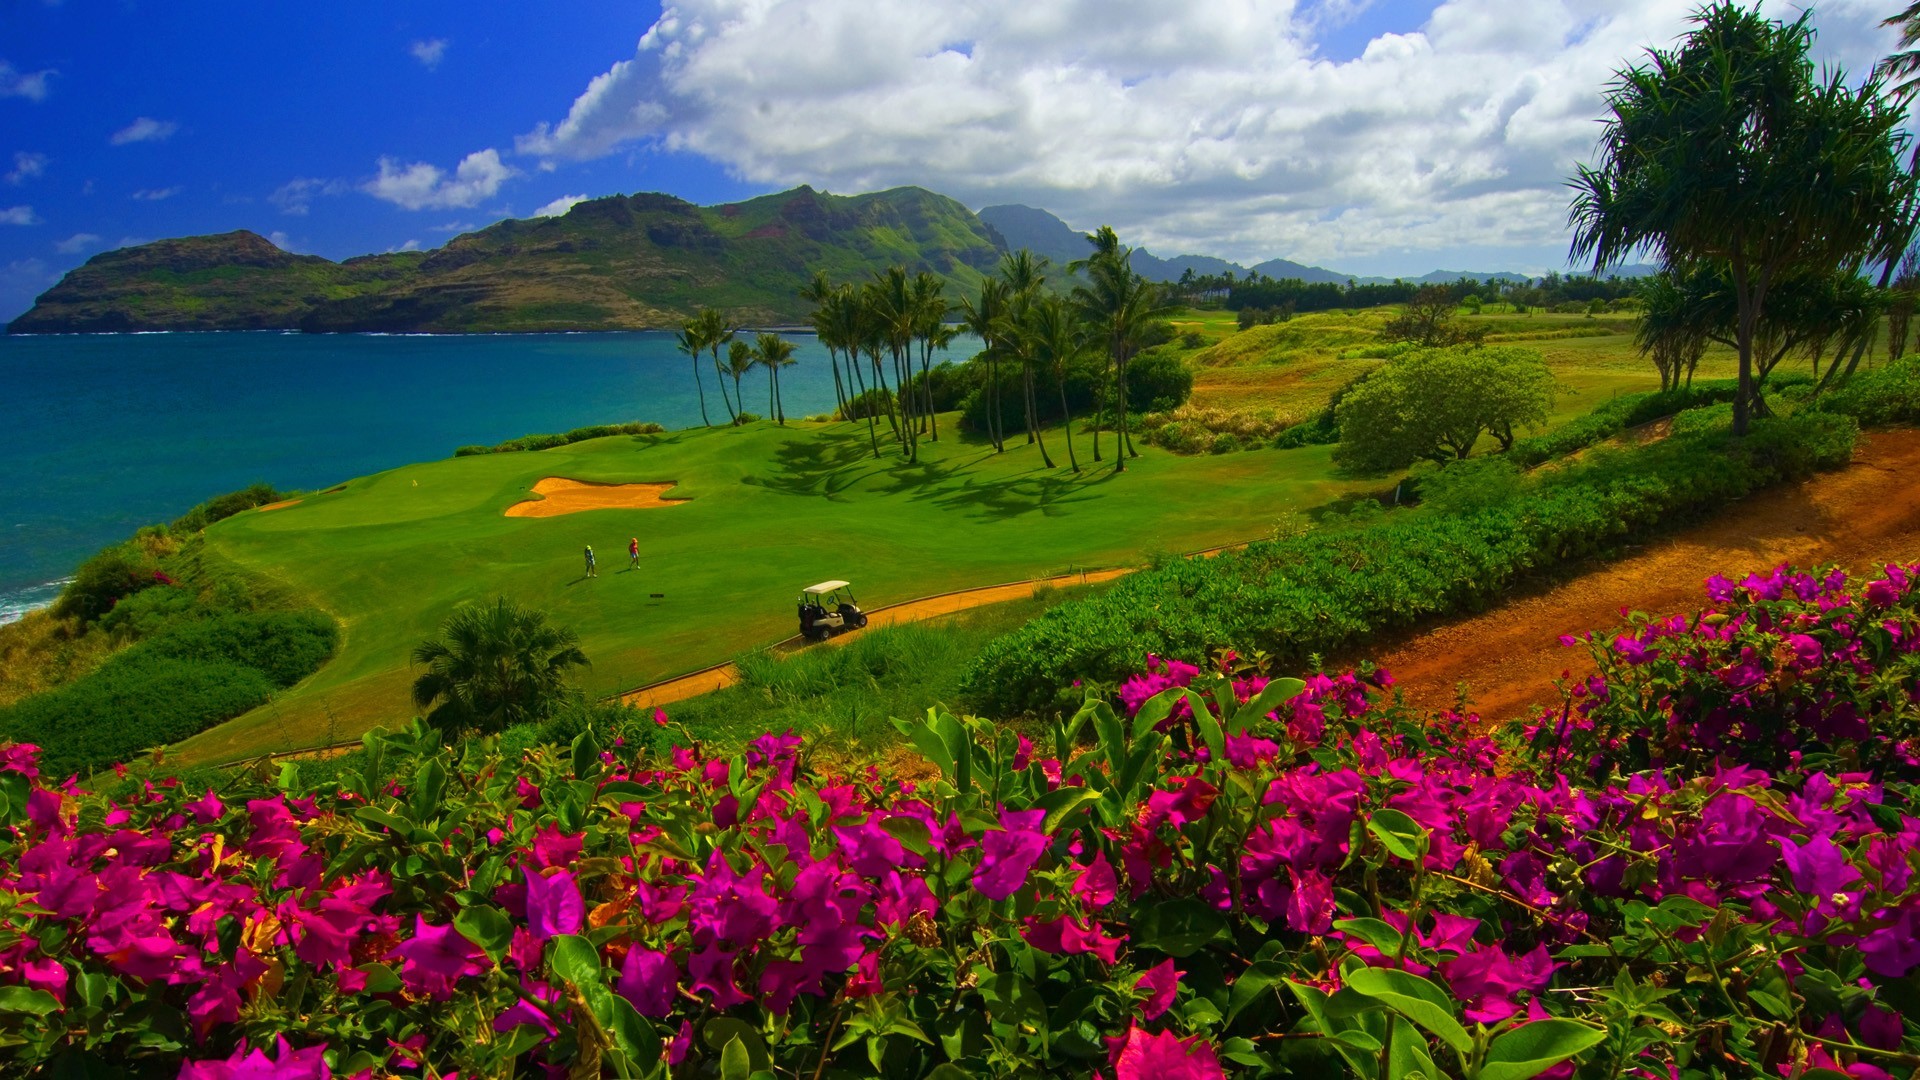 General 1920x1080 nature landscape water trees sea Hawaii golf course flowers grass sand palm trees mountains hills clouds